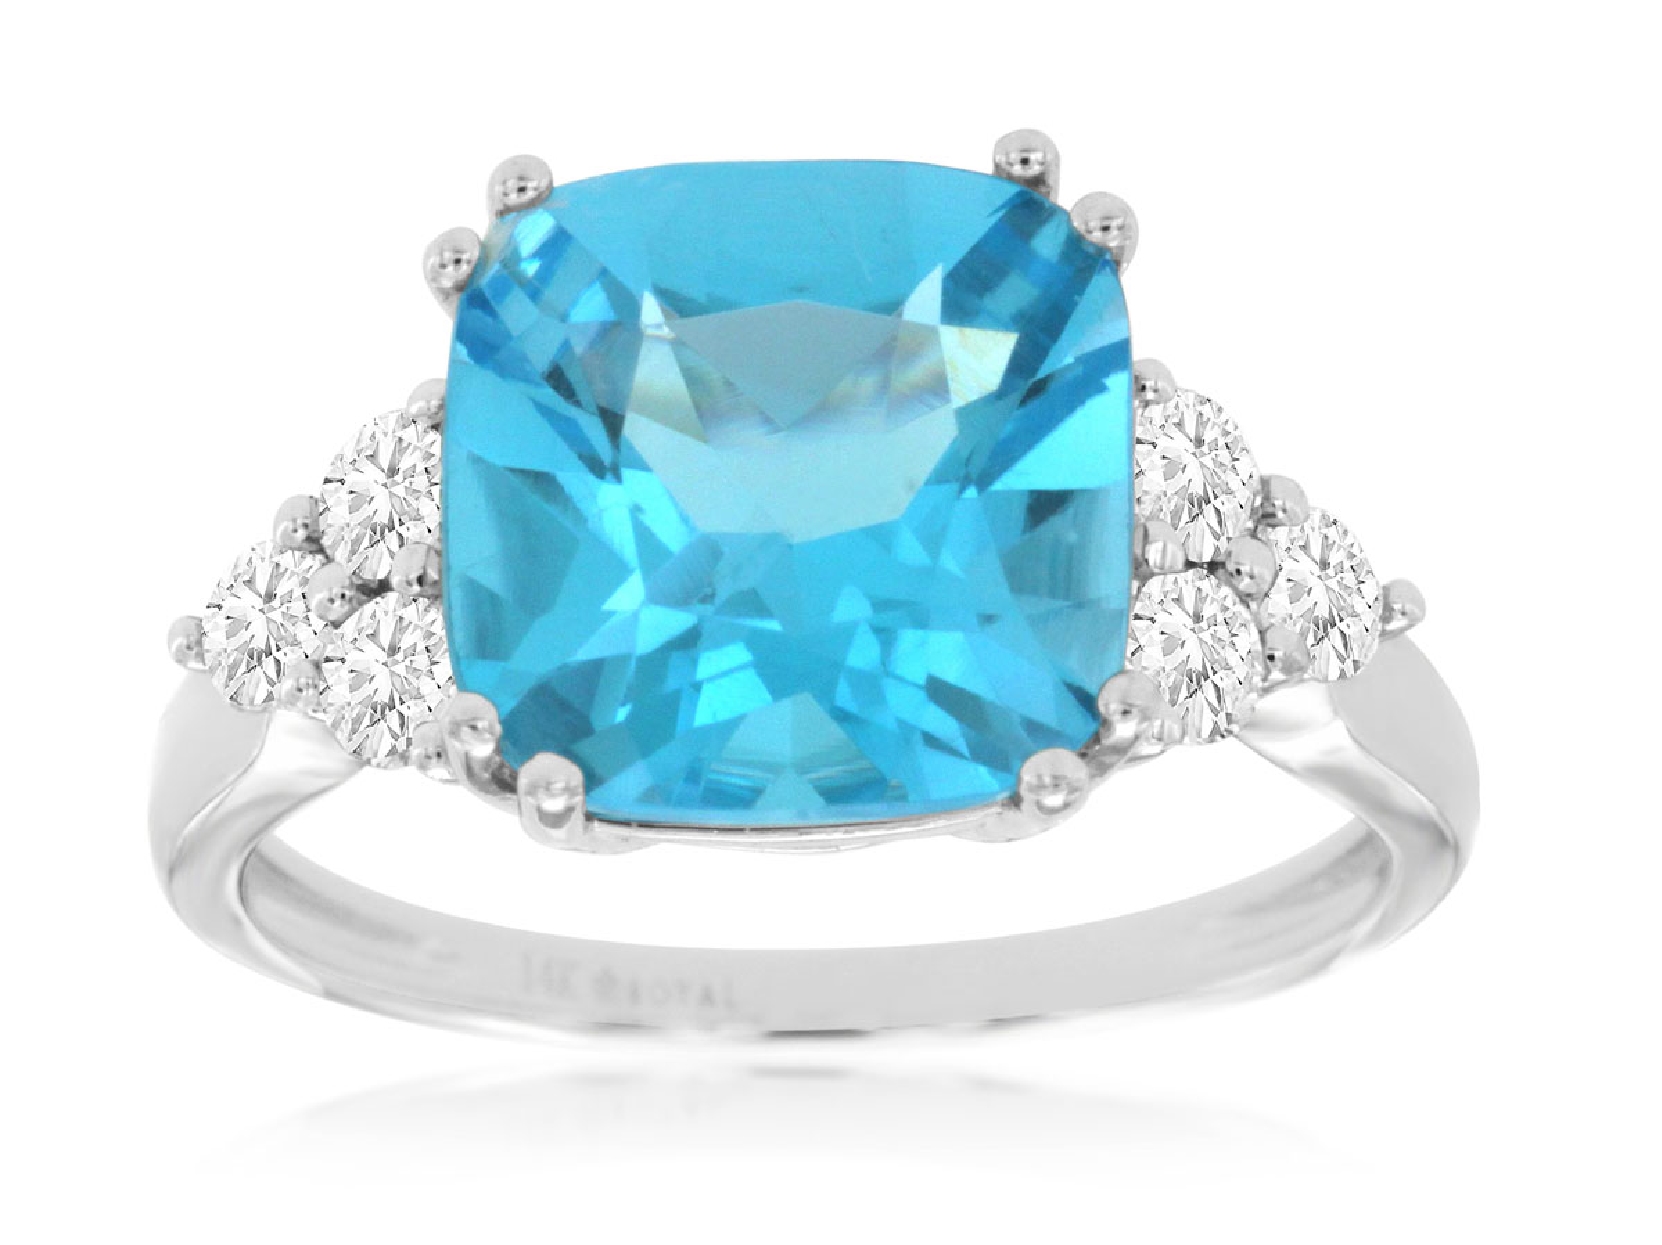 14K White Gold Square Blue Topaz Ring with Diamond Accents
.45 CT Diamond 
5.0 CT Blue Topaz

Size 7